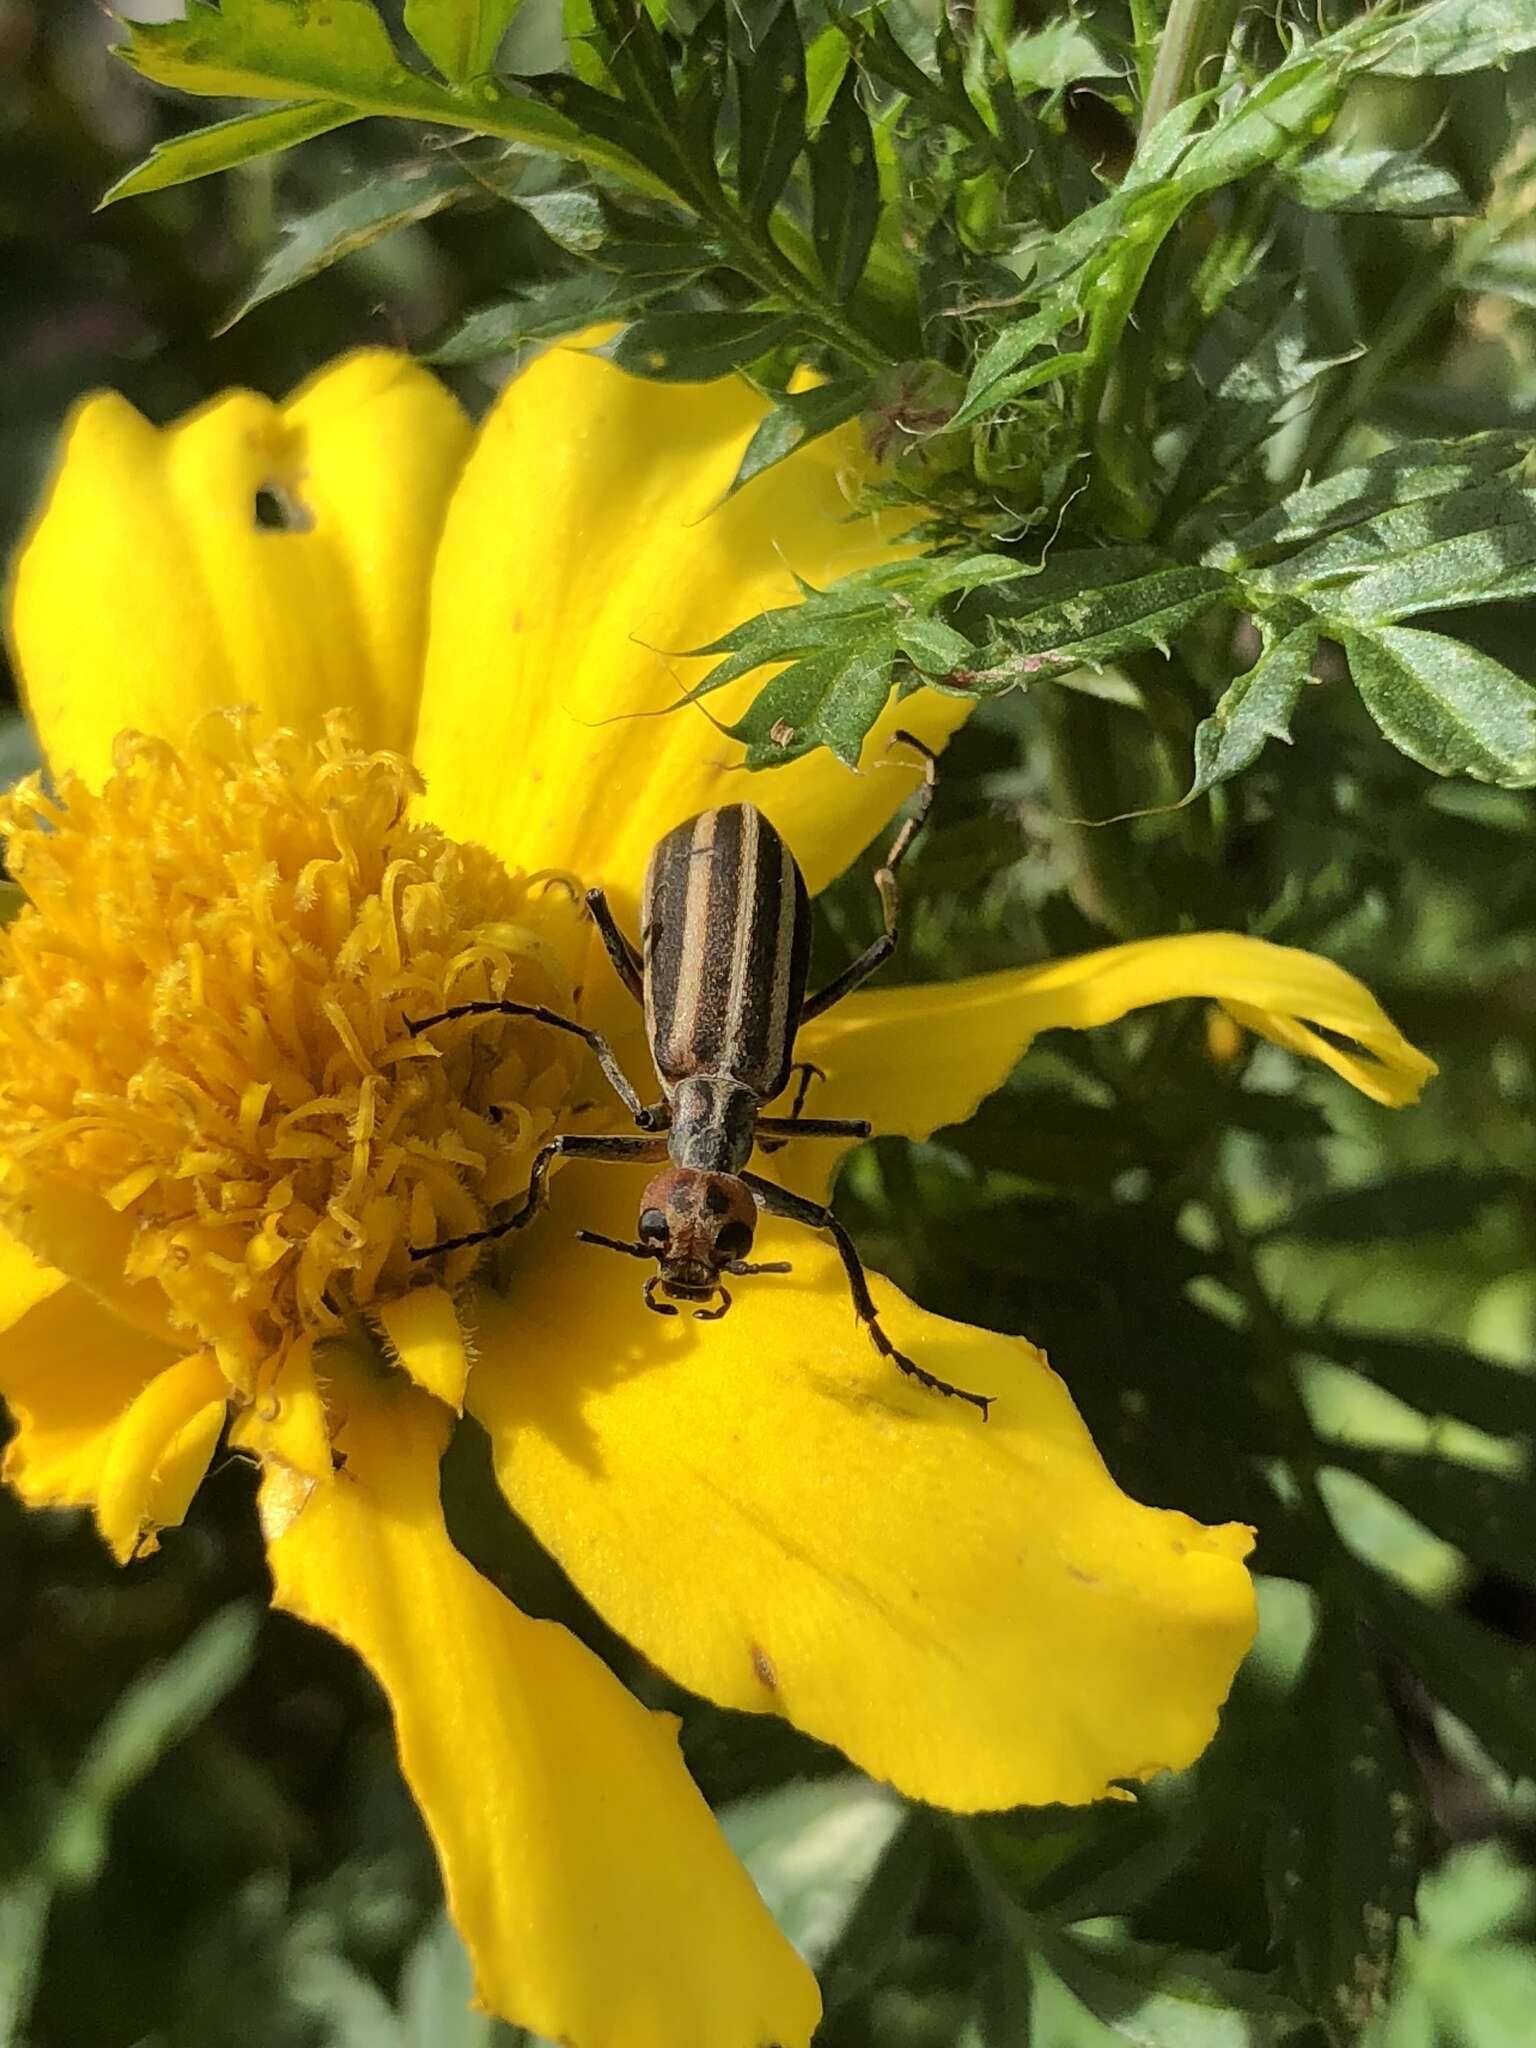 Image of Striped Blister Beetle